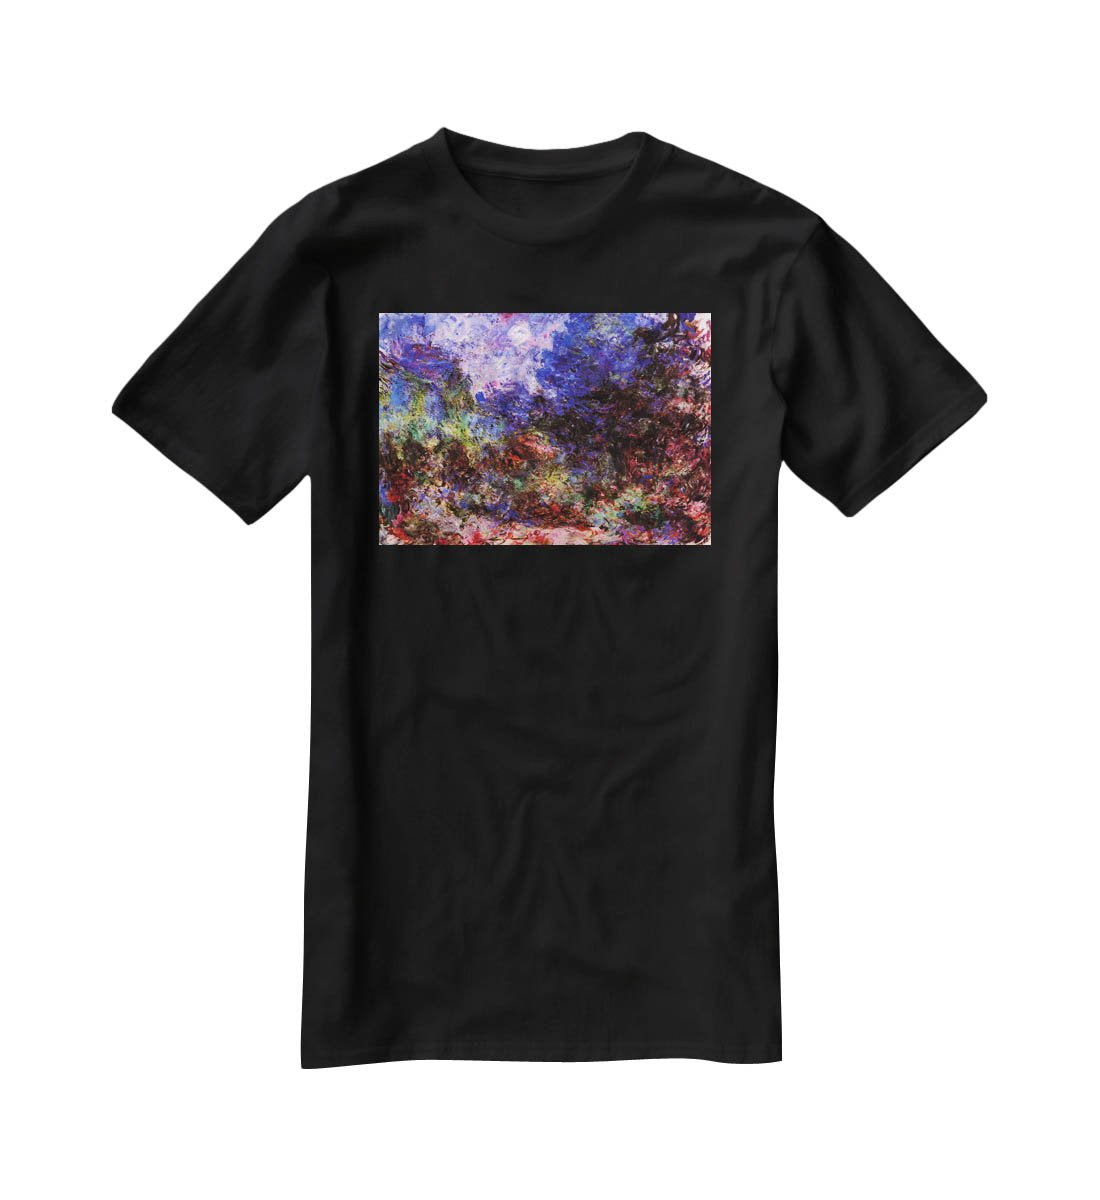 Roses at the garden side of Monets house in Giverny by Monet T-Shirt - Canvas Art Rocks - 1